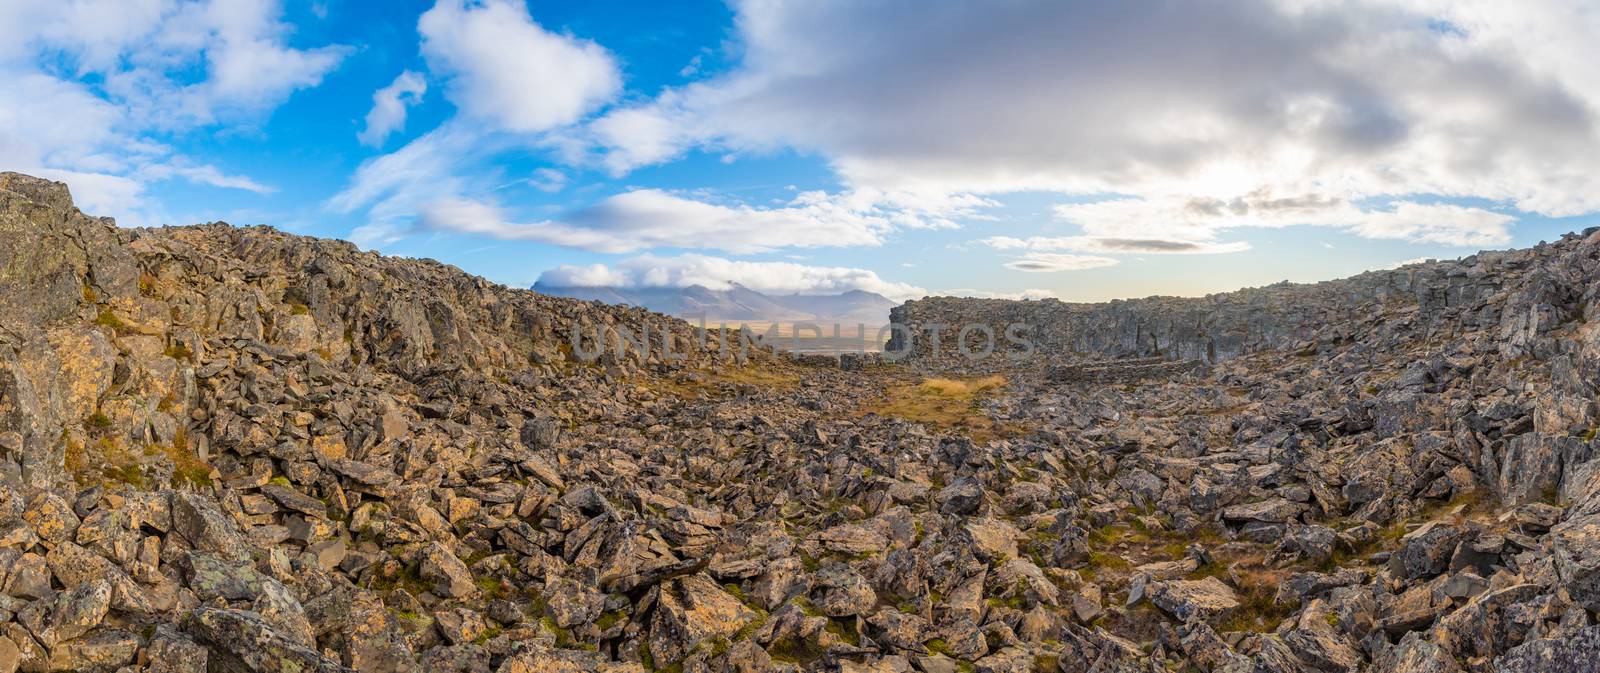 Borgarvirki mountain castle in Iceland view over ancient remains during beautiful sunny day by MXW_Stock